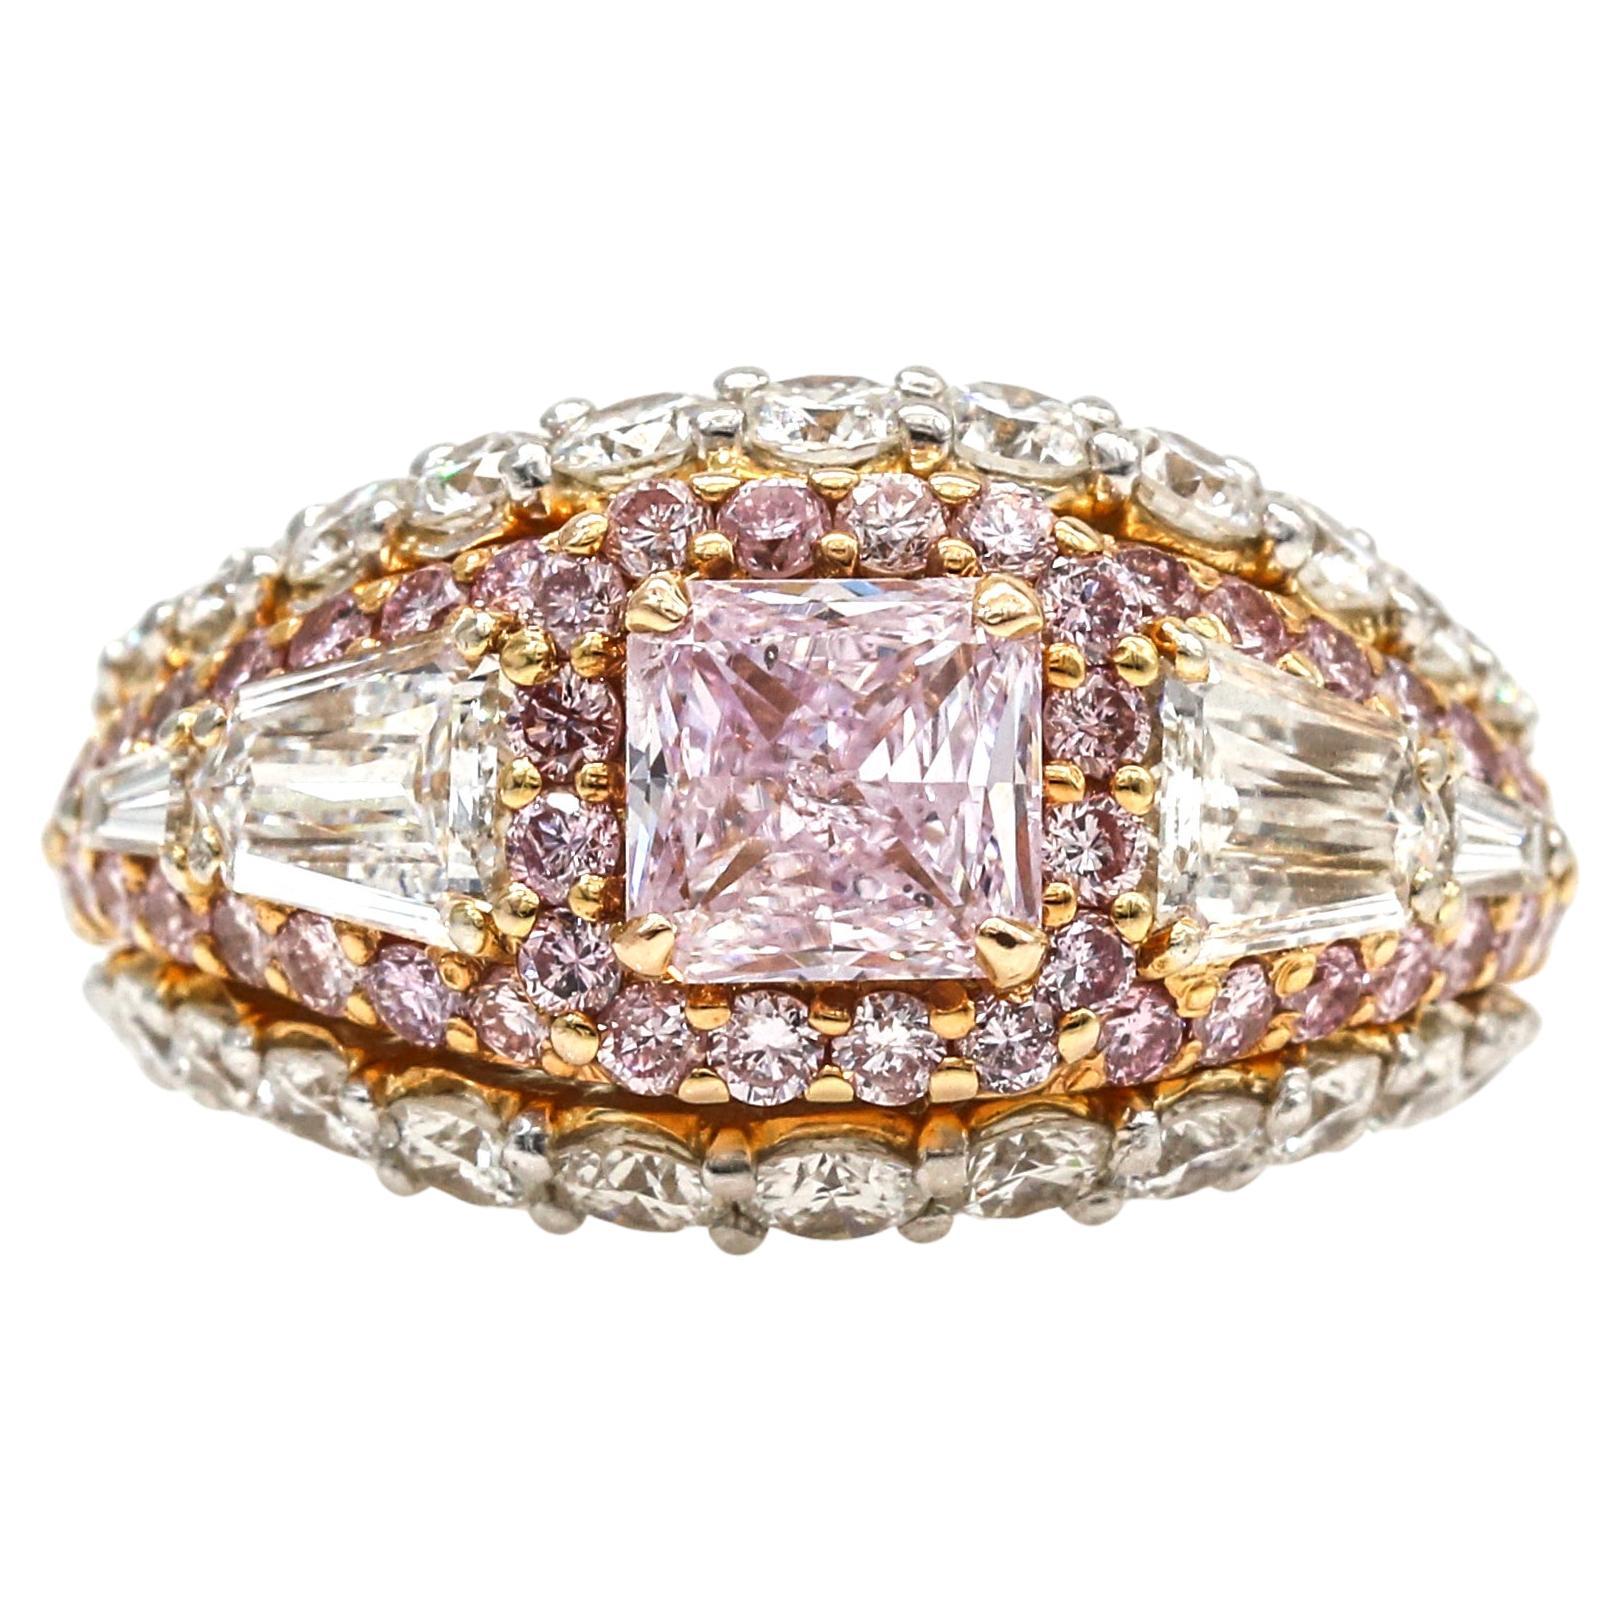 GIA Certified Fancy Pink Diamond Engagement Ring in Platinum and 18k Gold For Sale